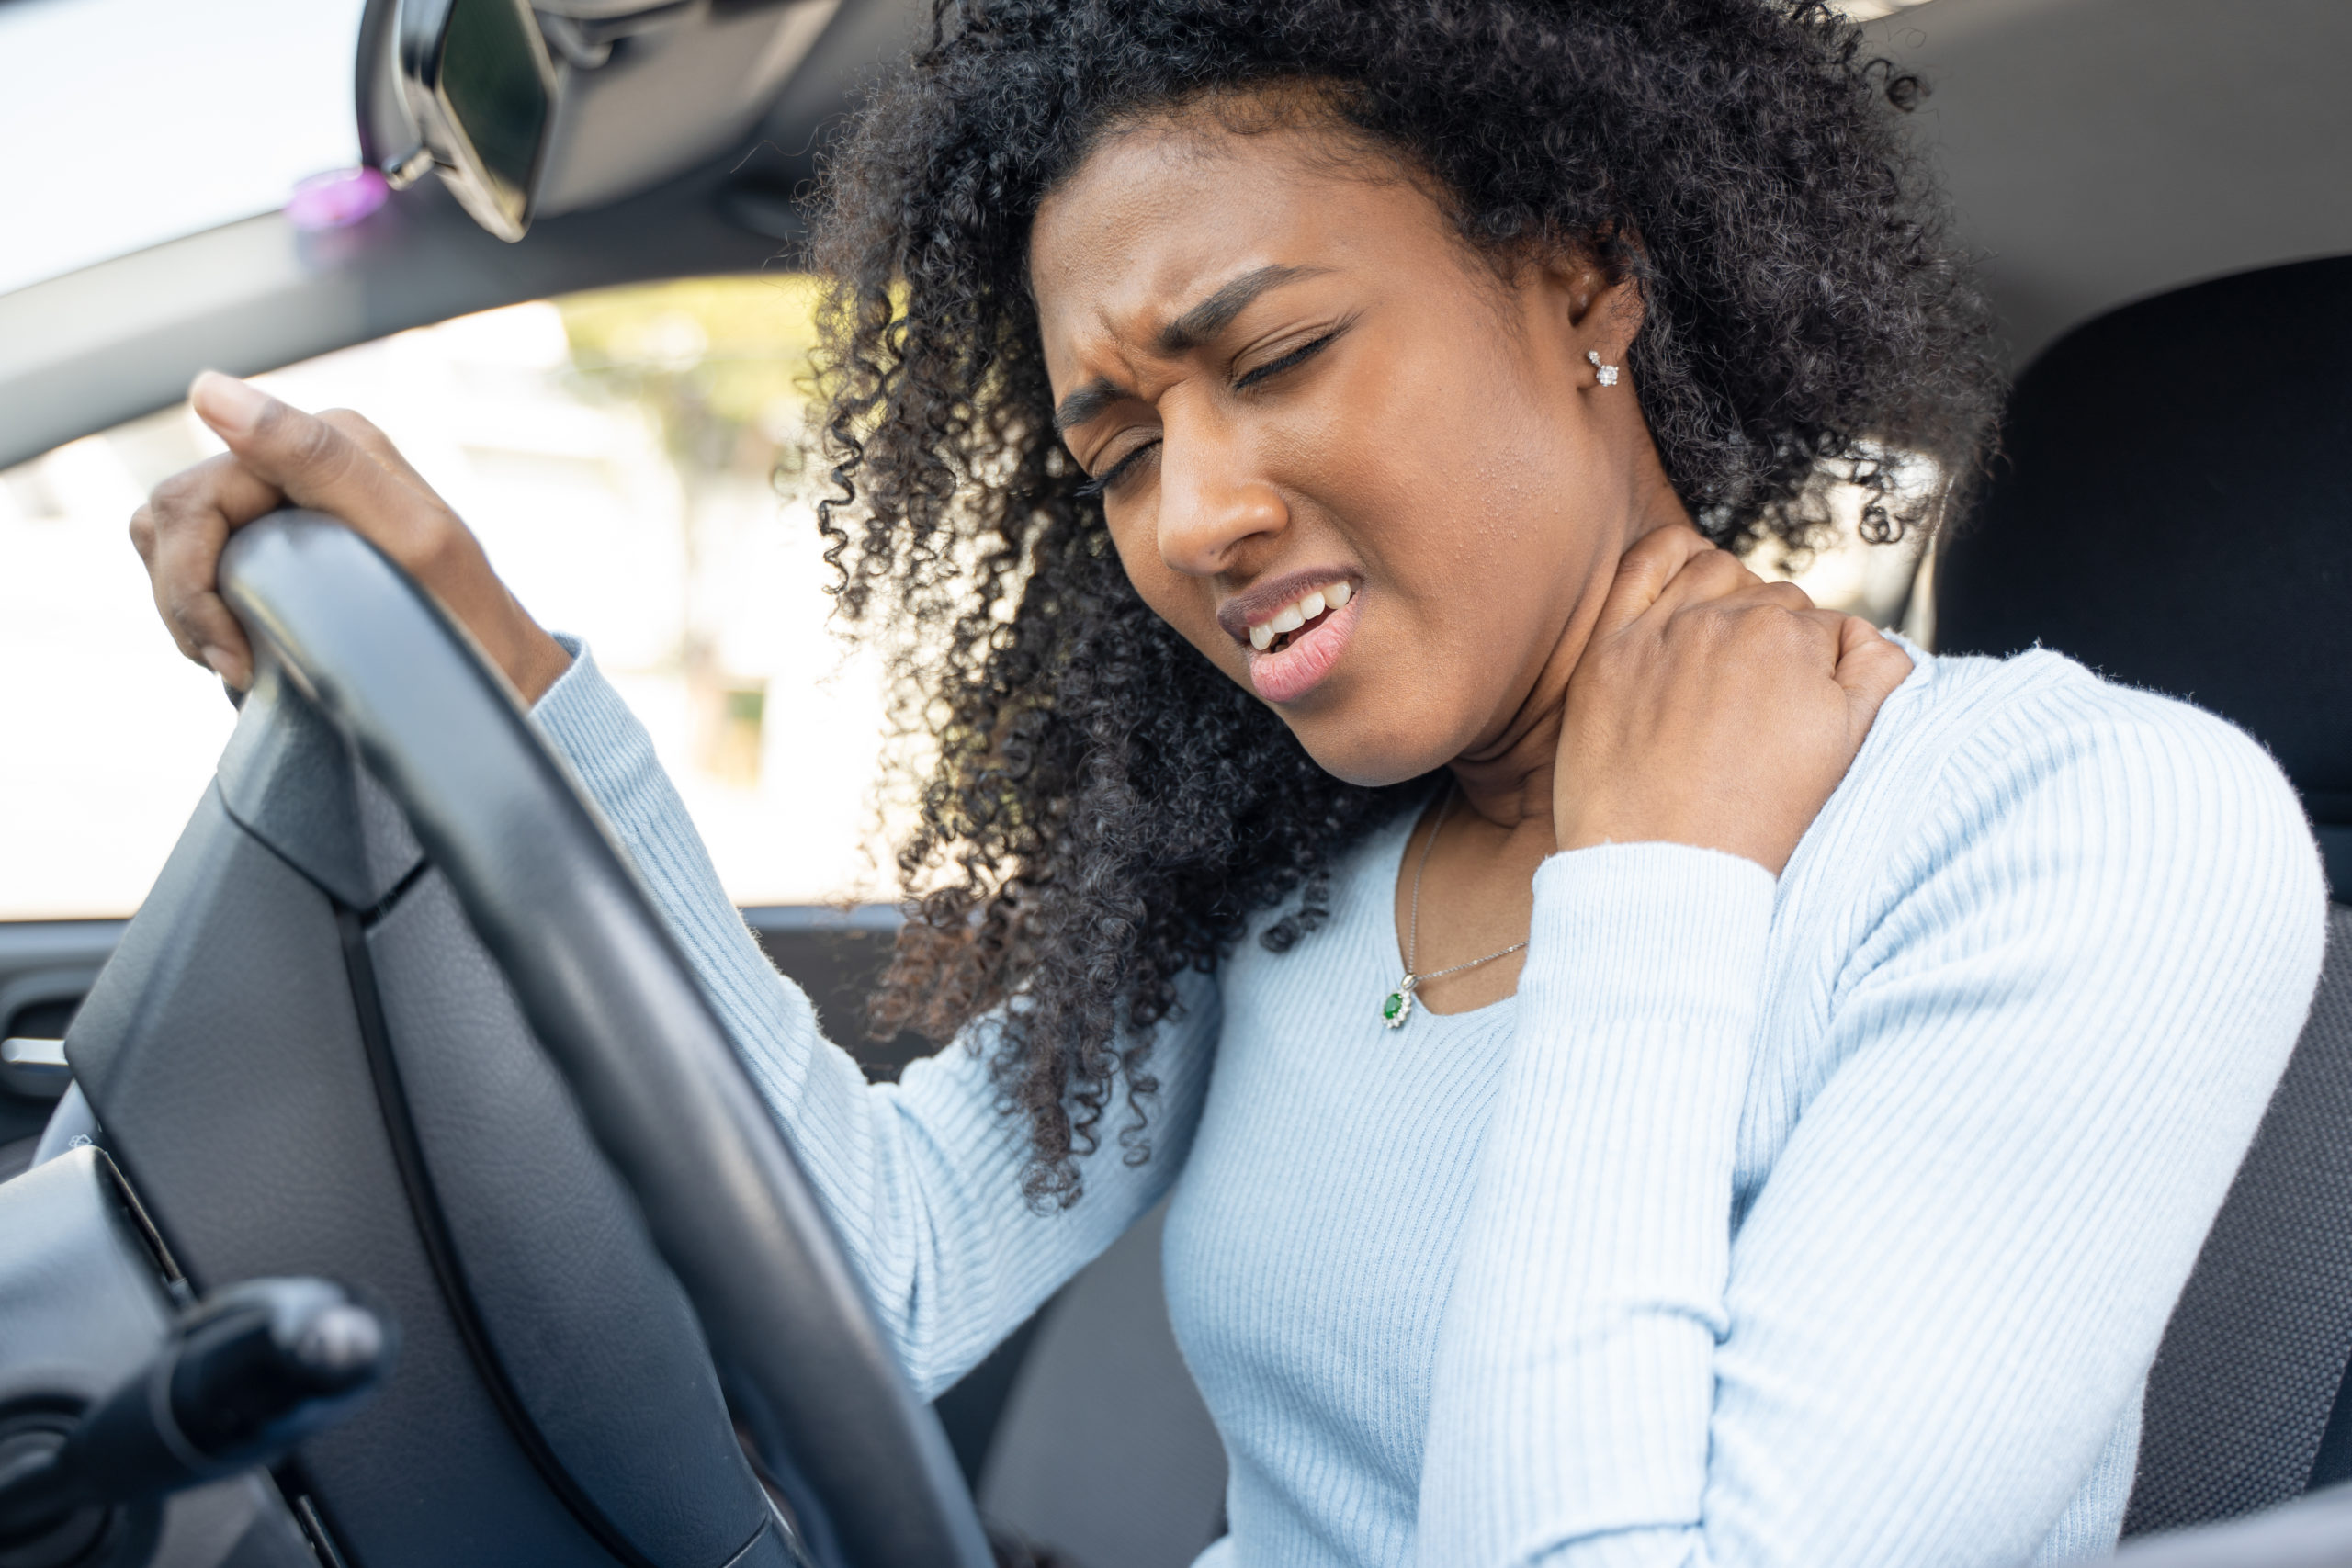 7 Common Car Accident Injuries in California